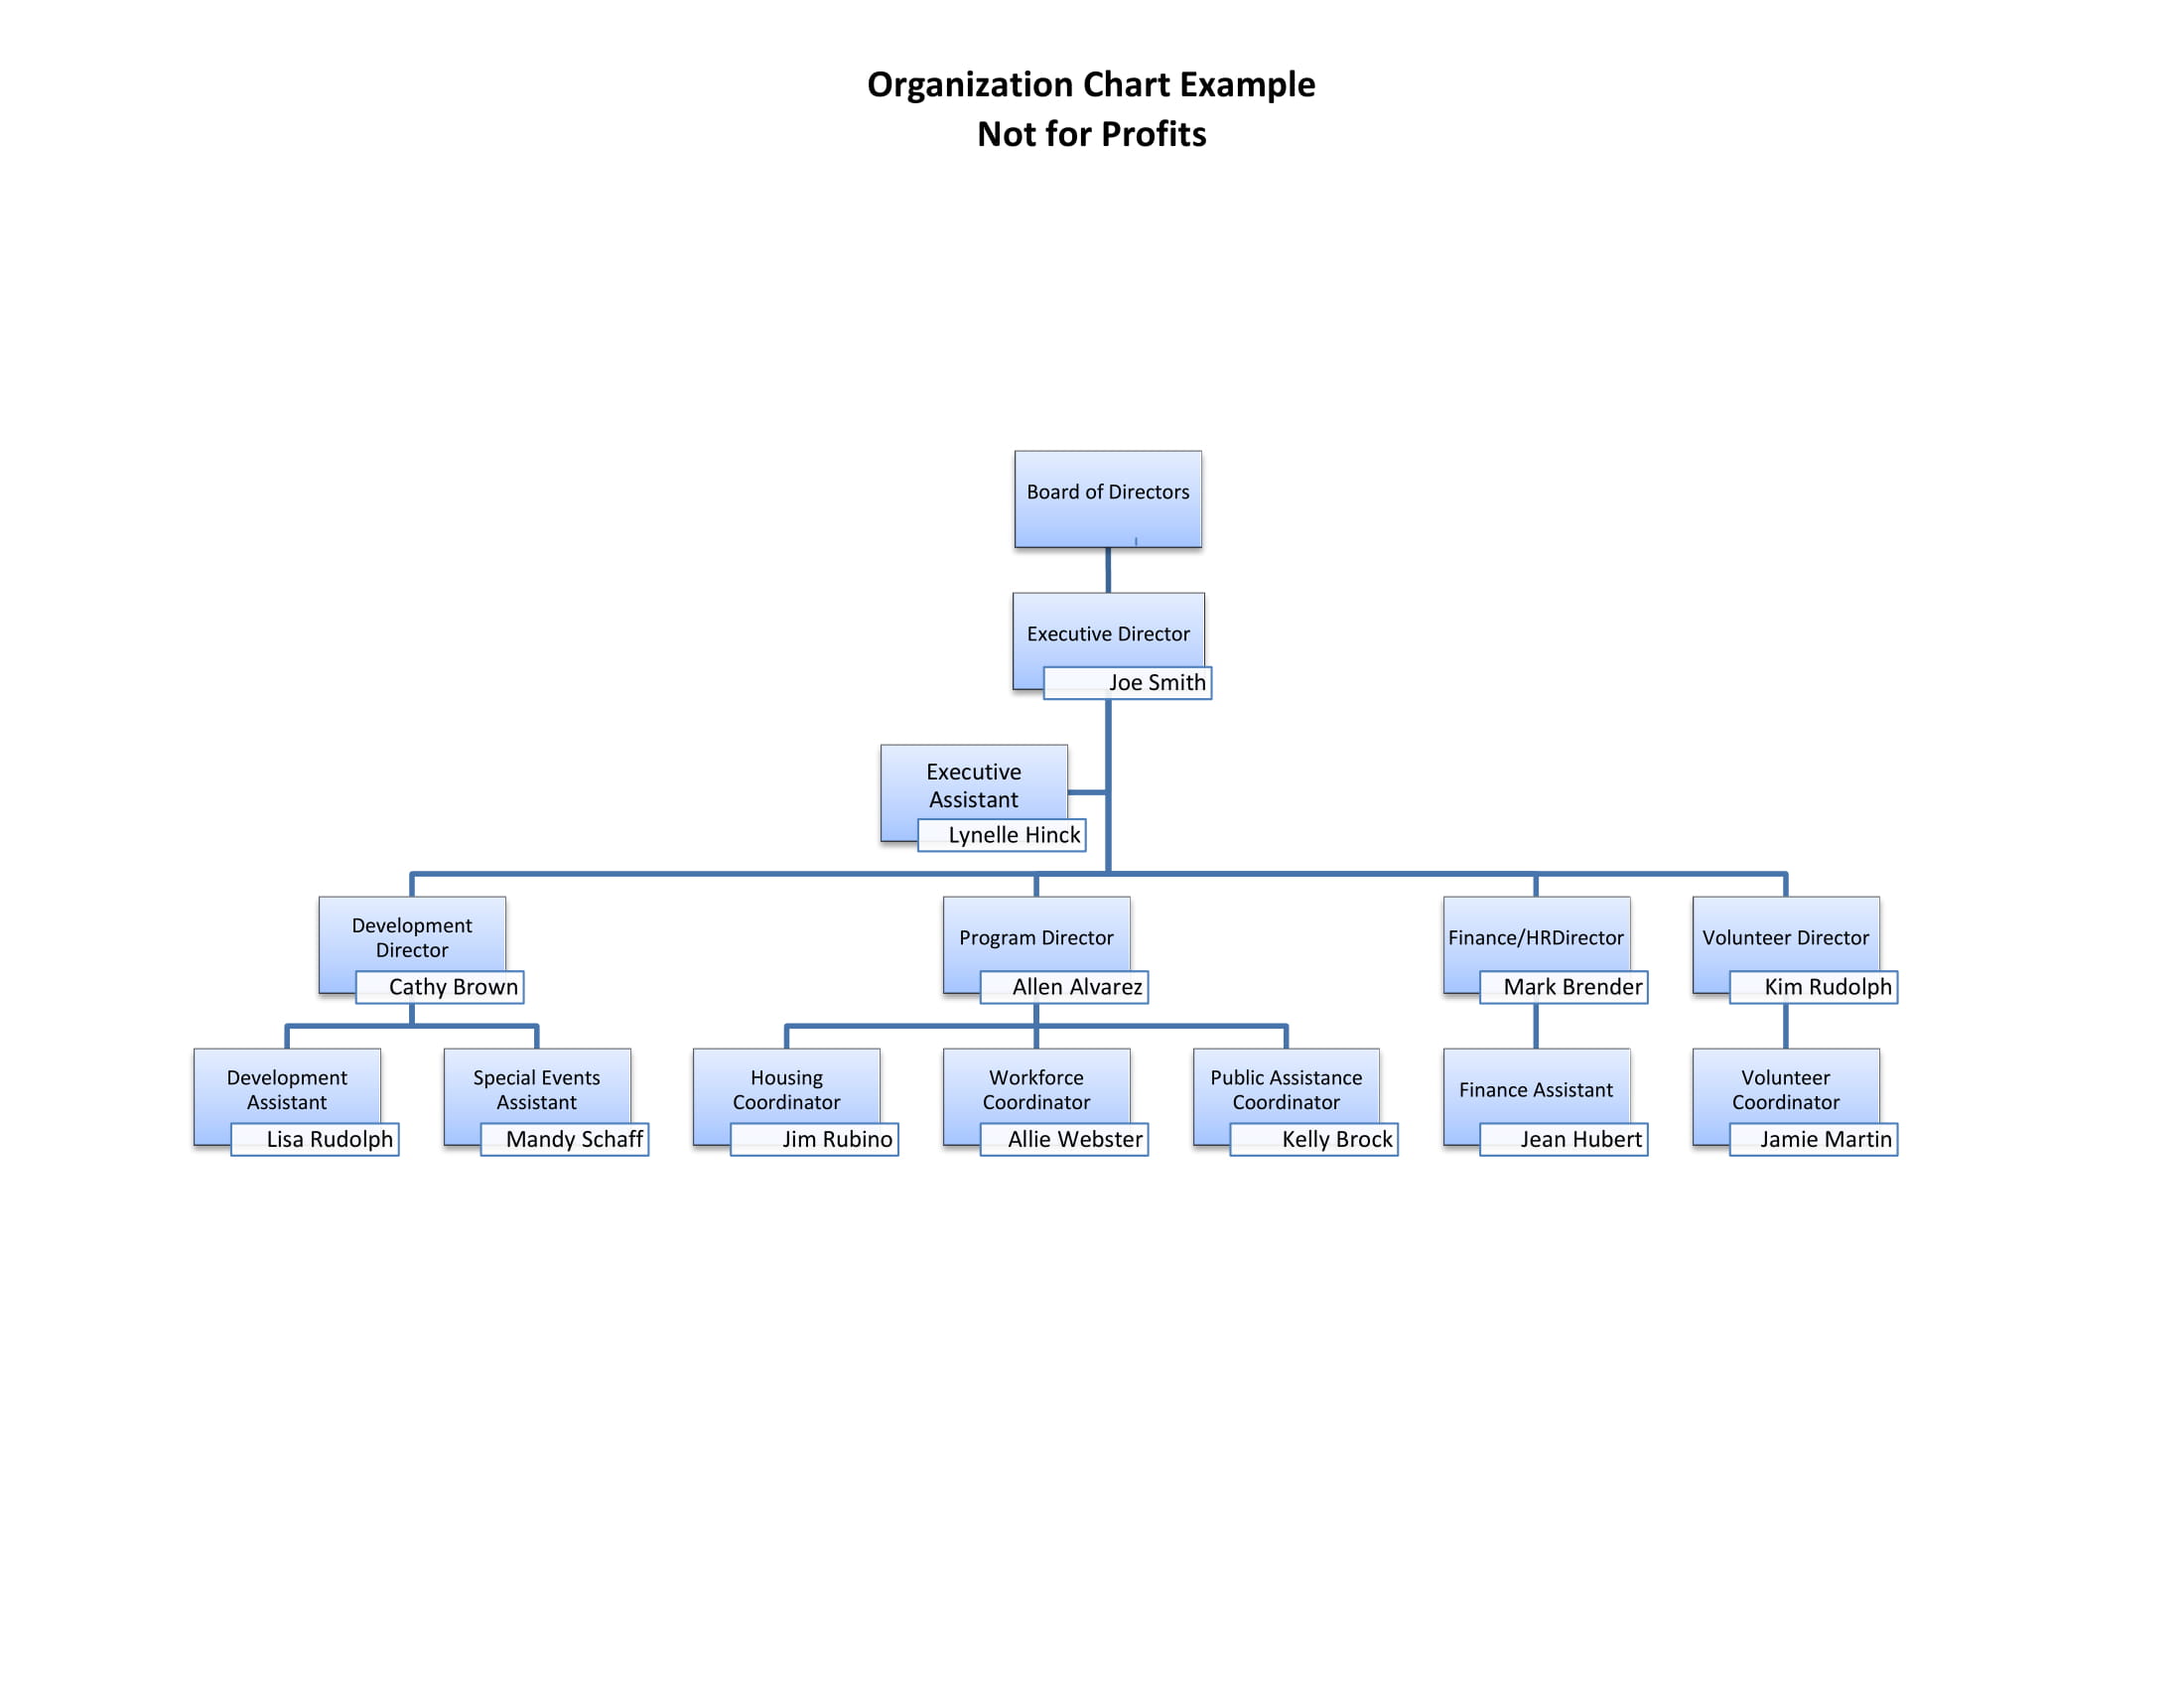 not for profit organizational chart example